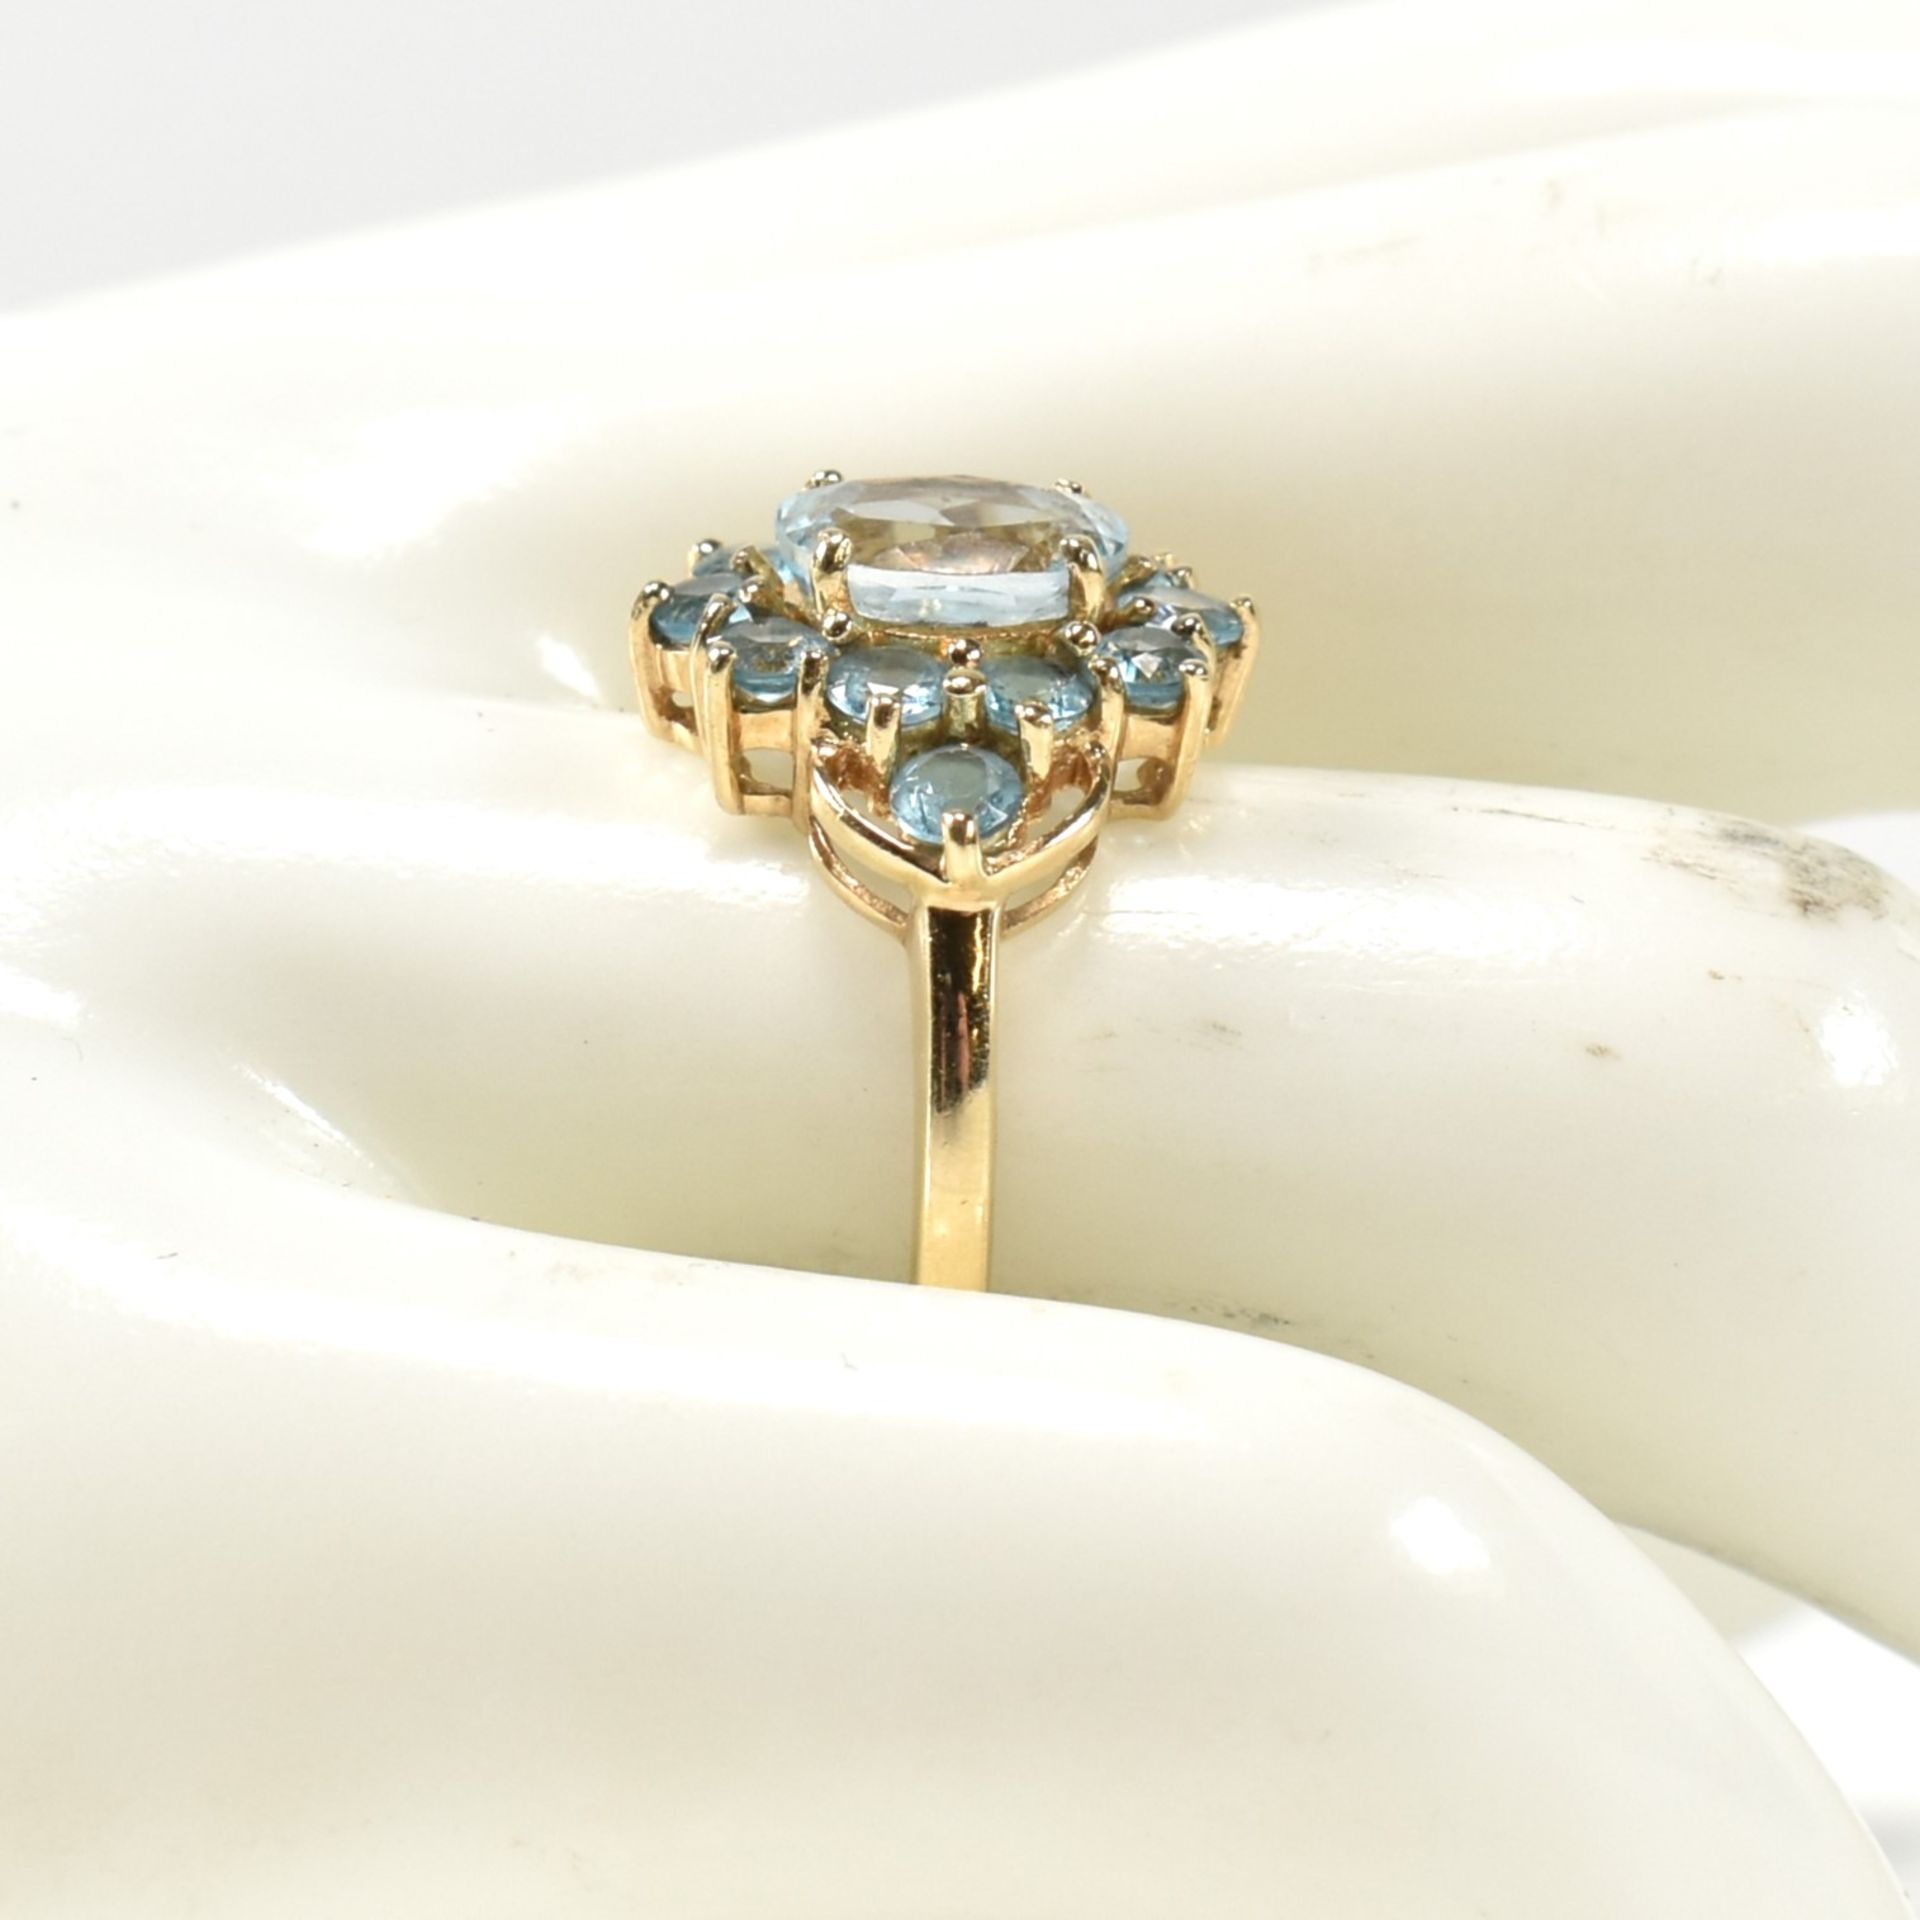 HALLMARKED 9CT GOLD & TOPAZ CLUSTER RING - Image 8 of 8